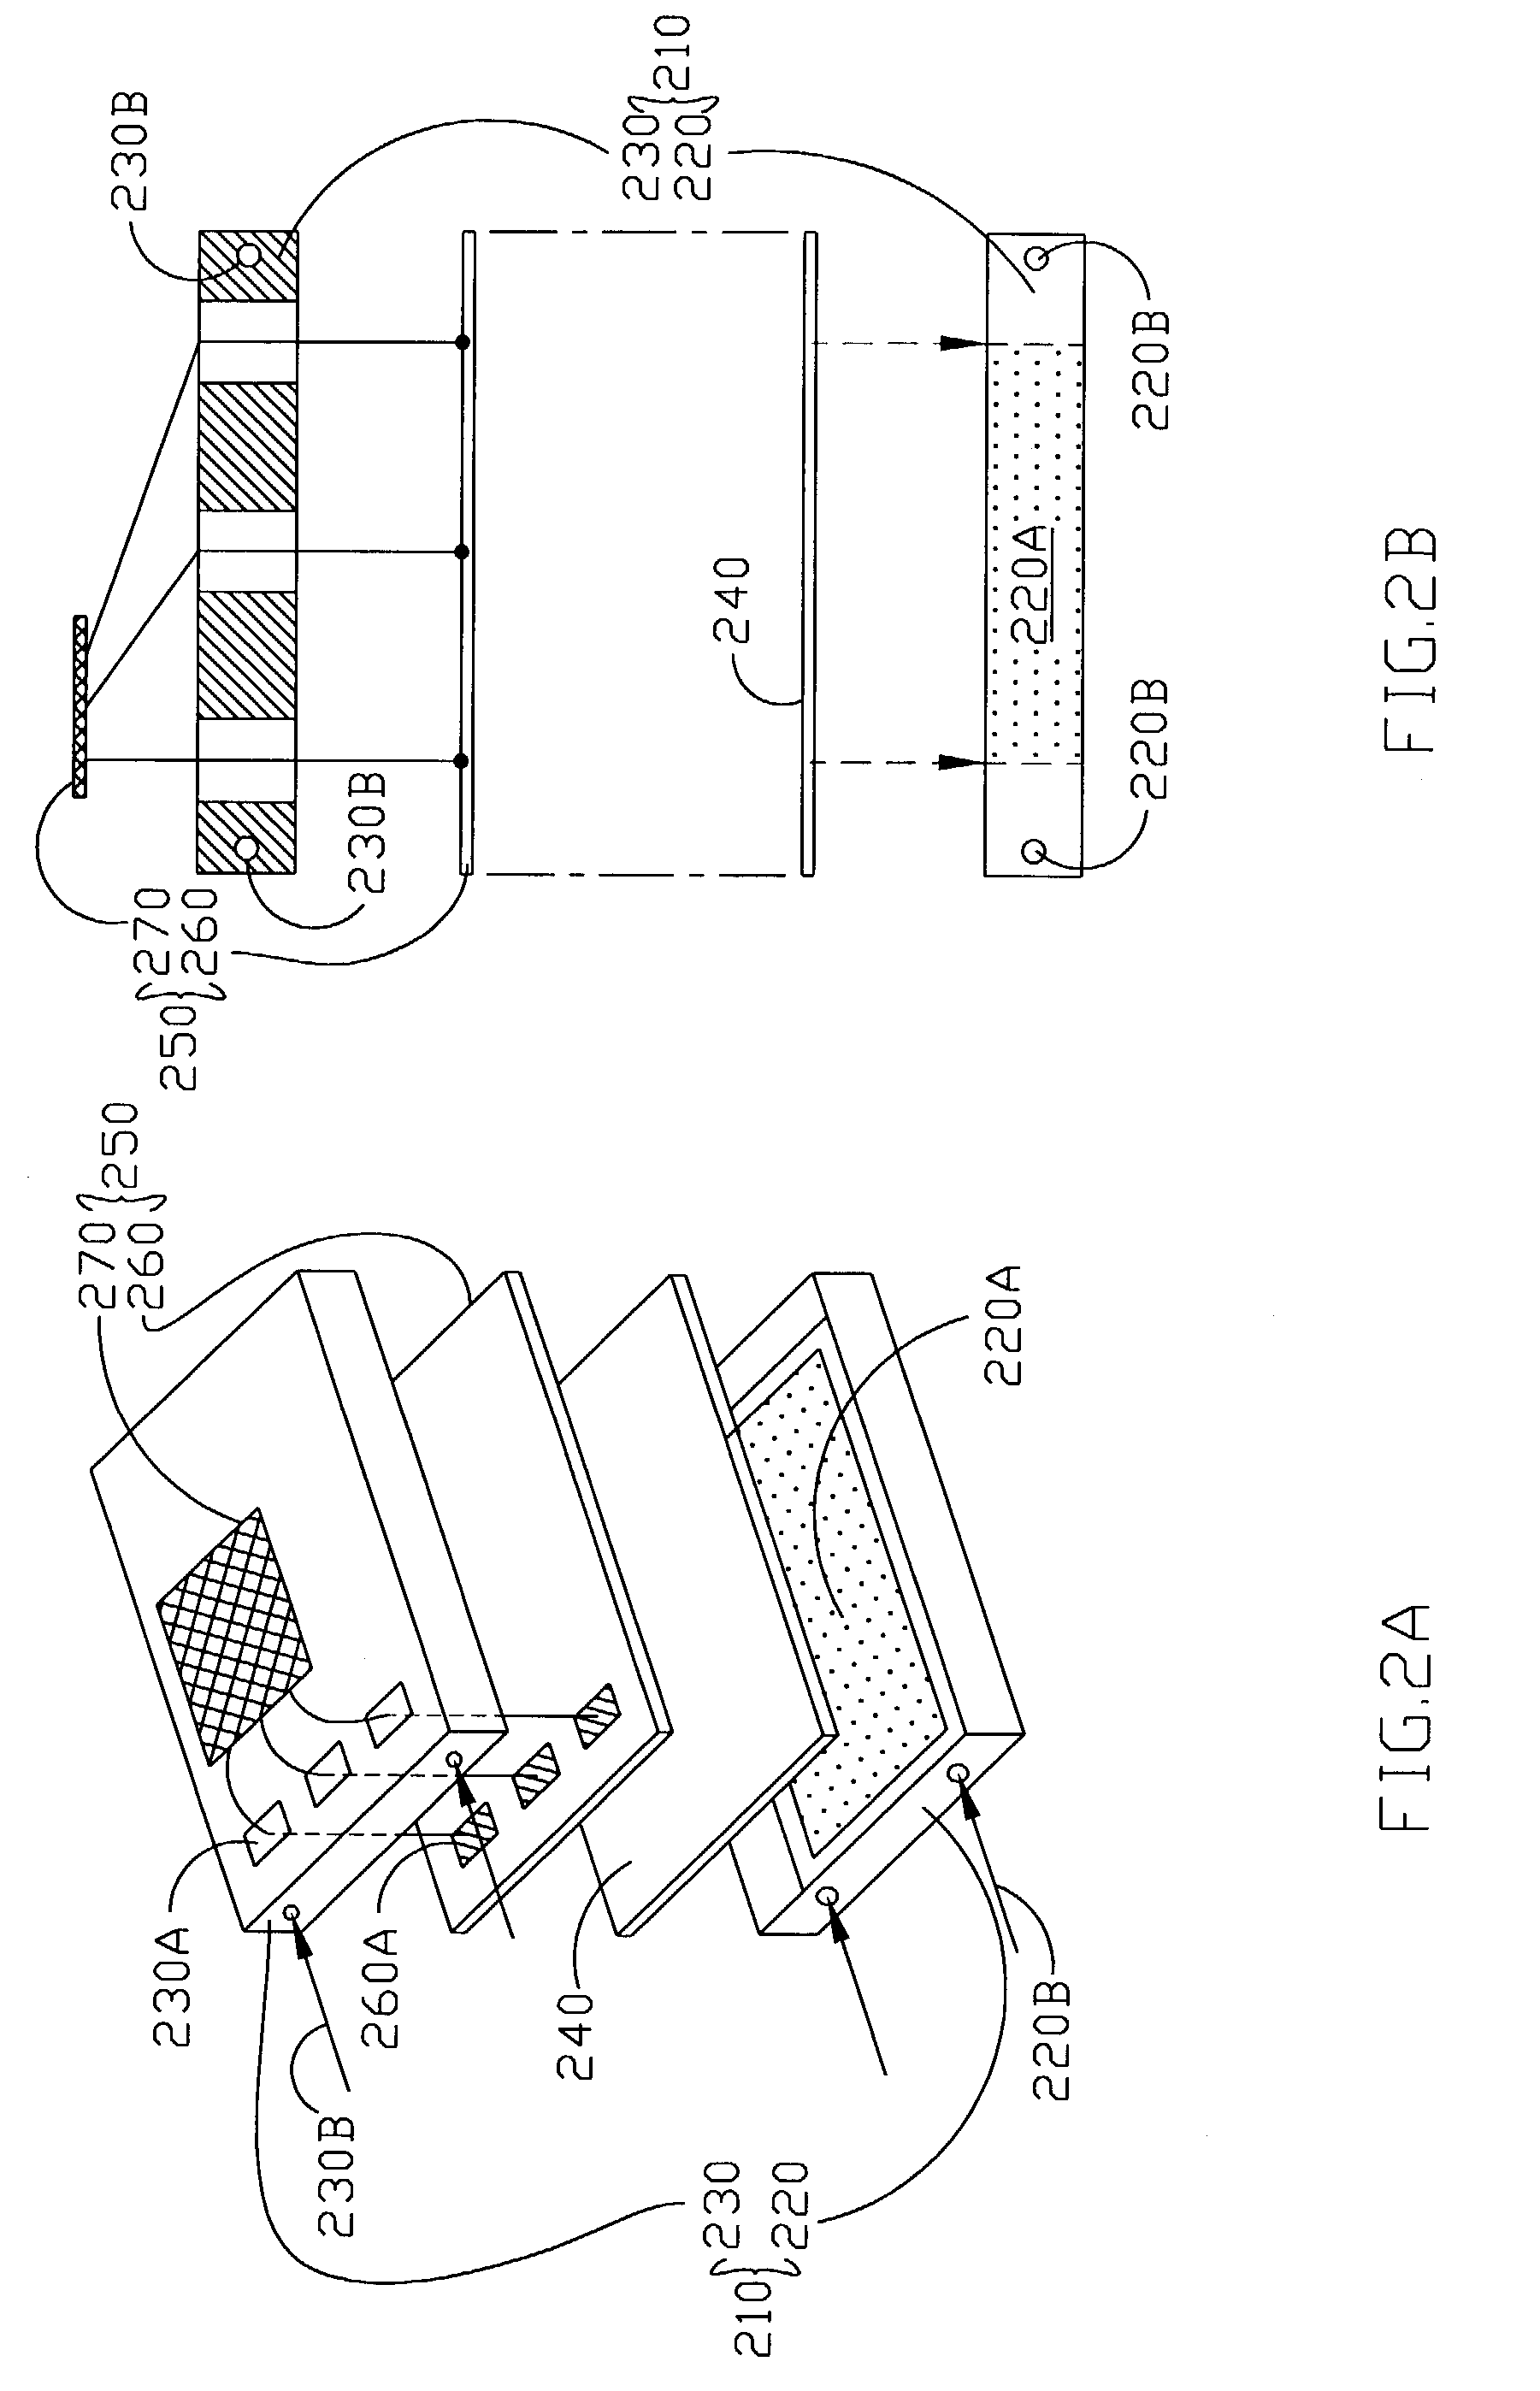 Package for the display module with the electromagnetic module